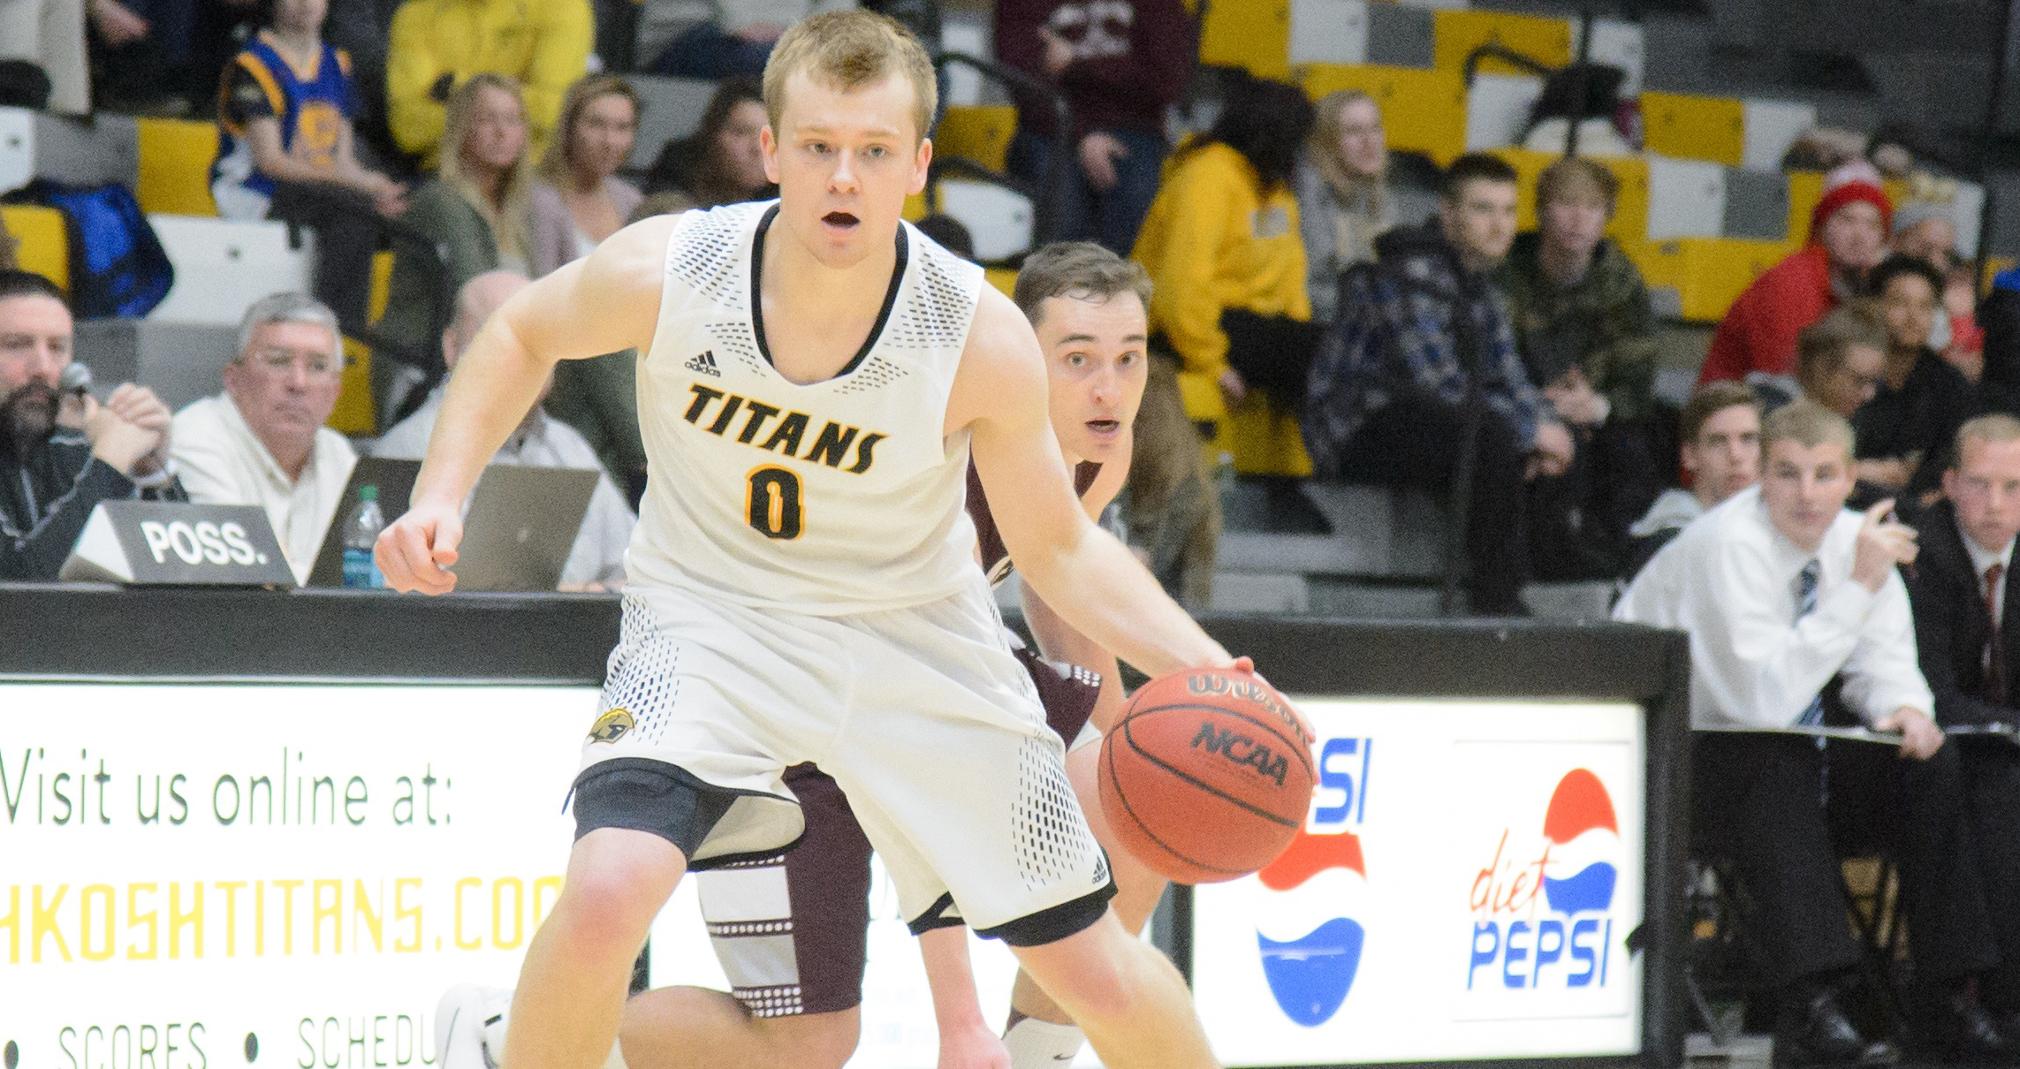 Charlie Noone tallied 12 points and five rebounds to help the Titans record their second straight win over UW-Stevens Point.